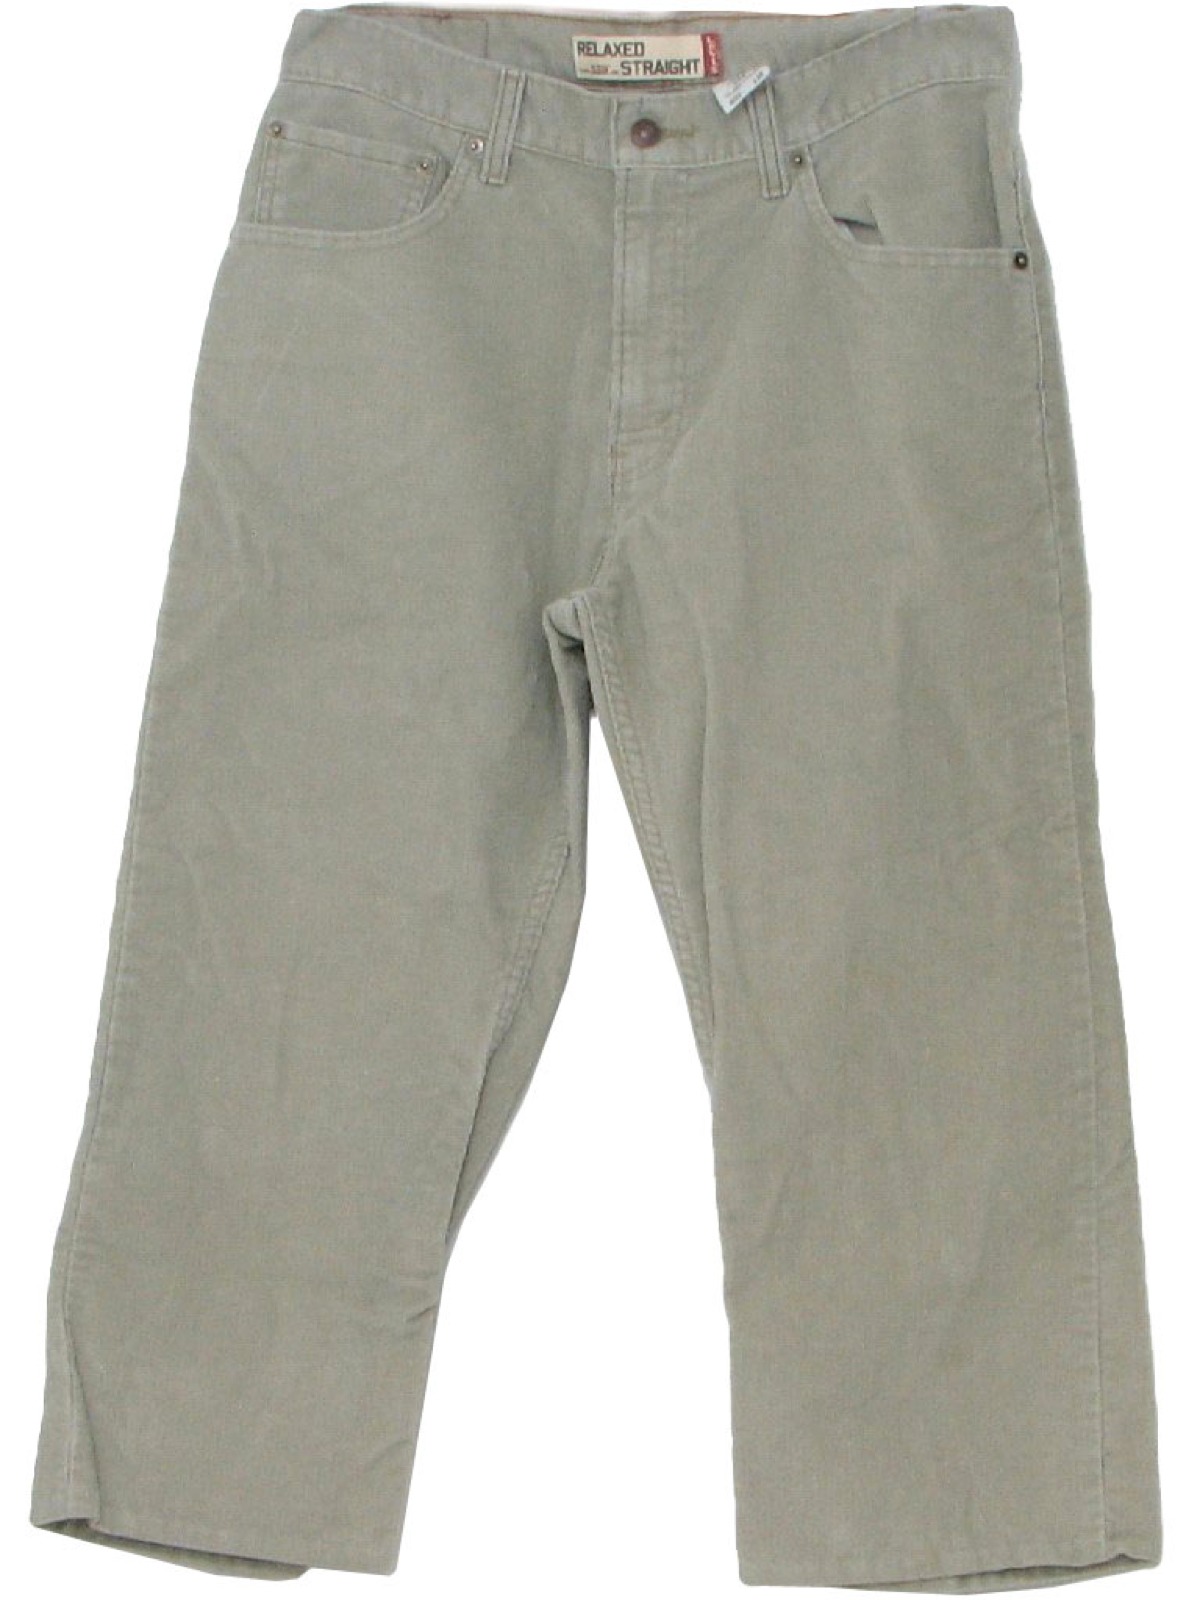 90's Levis 559 Pants: 90s -Levis 559- Mens khaki grey thin pinwale cotton  and polyester corduroy pants with classic five pocket cut, button/zip  closure and relaxed straight leg. Altered to wader length.